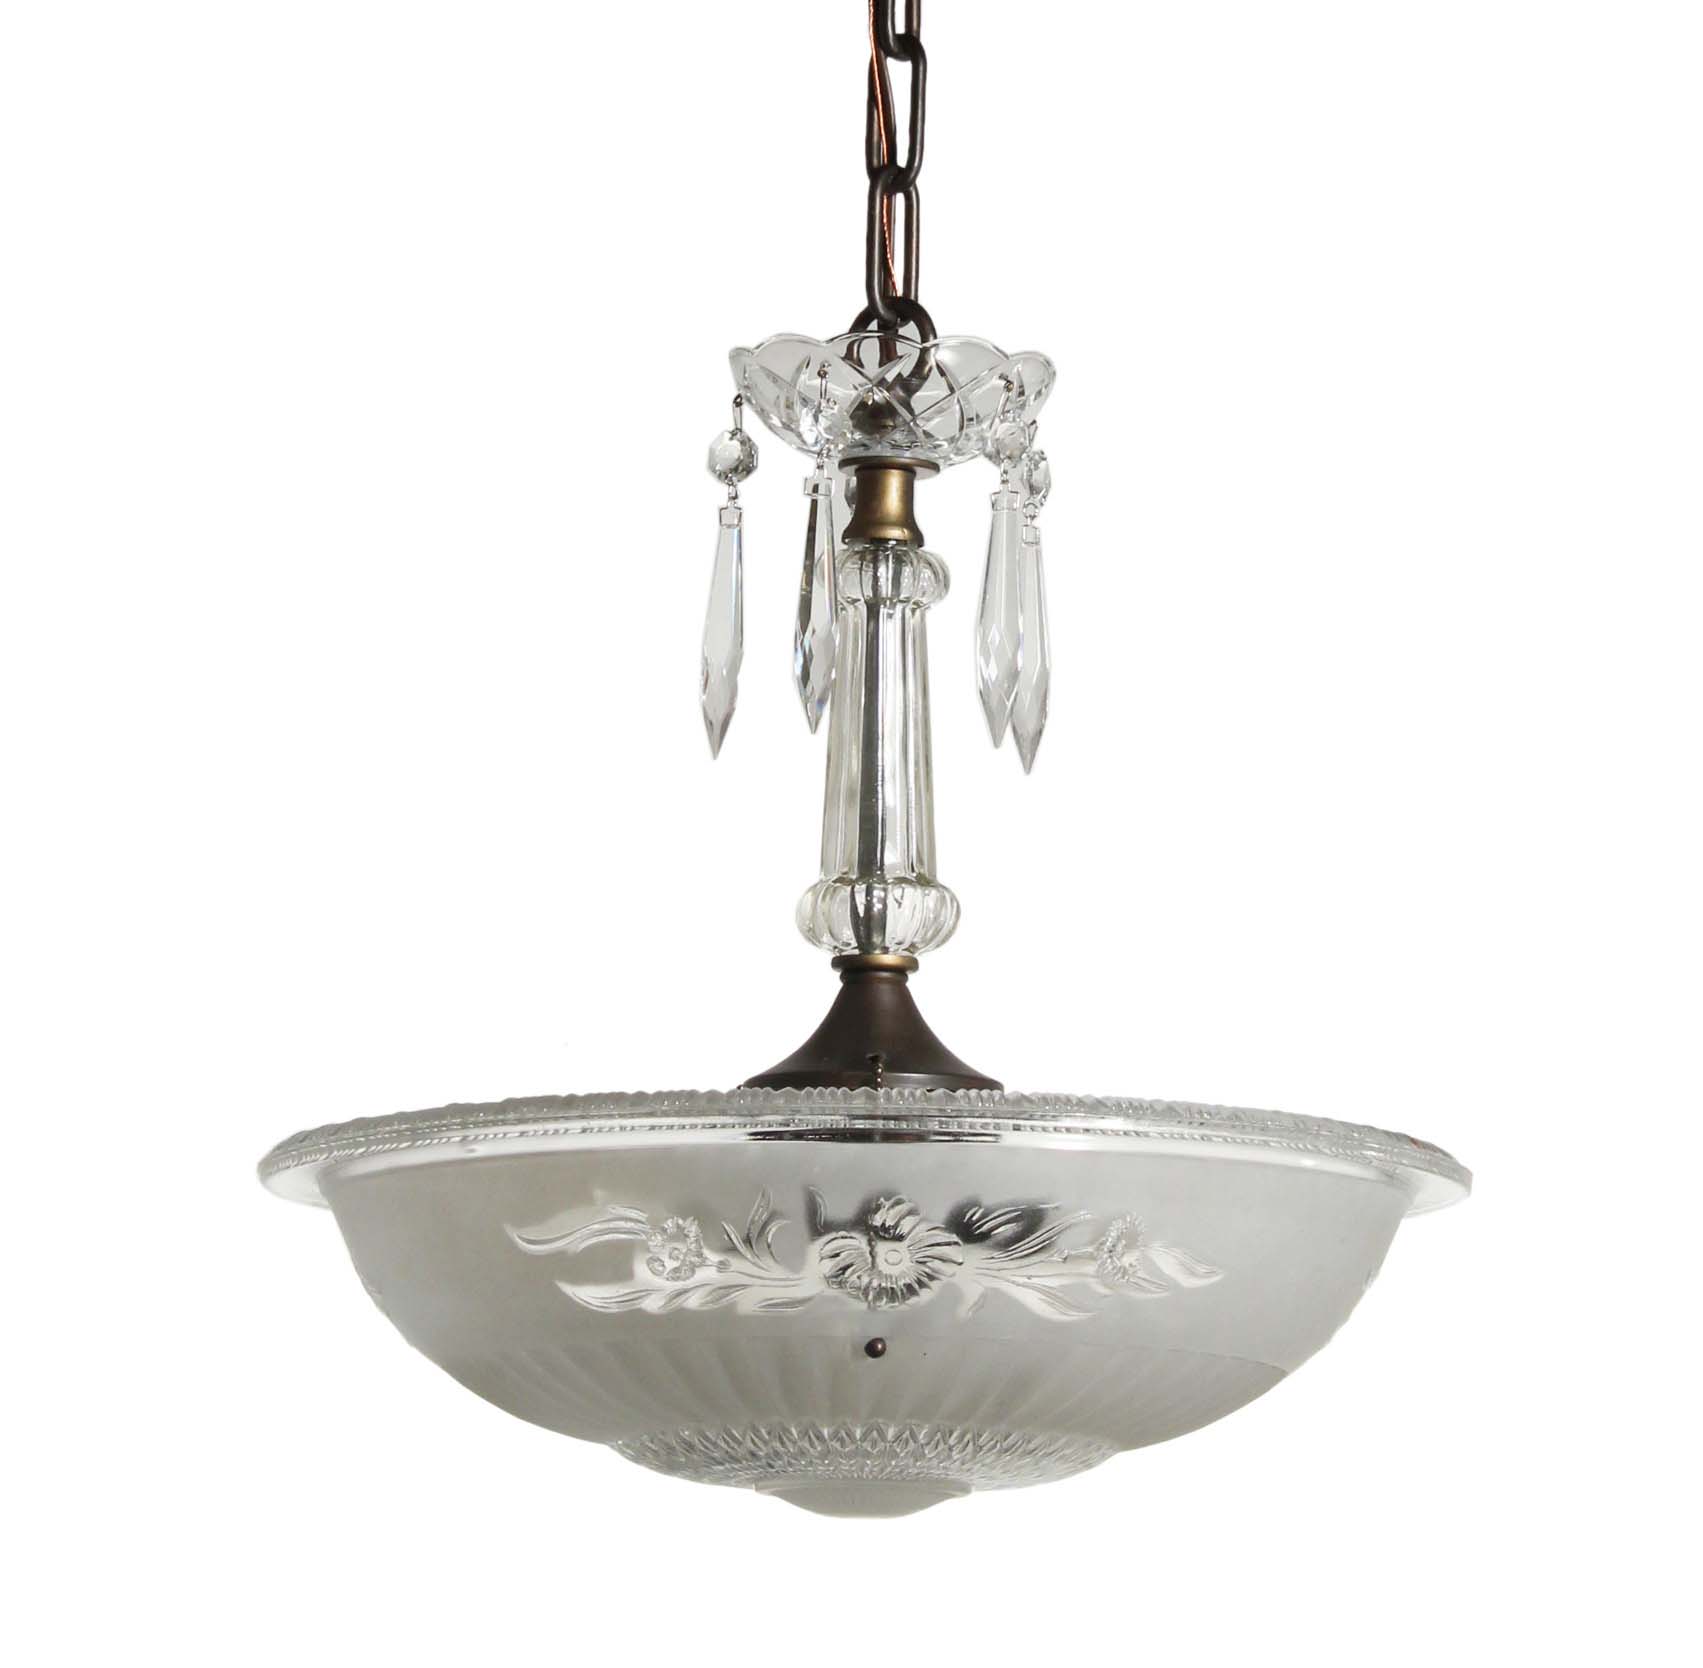 SOLD Vintage Pendant Lights with Original Glass Shades-68106